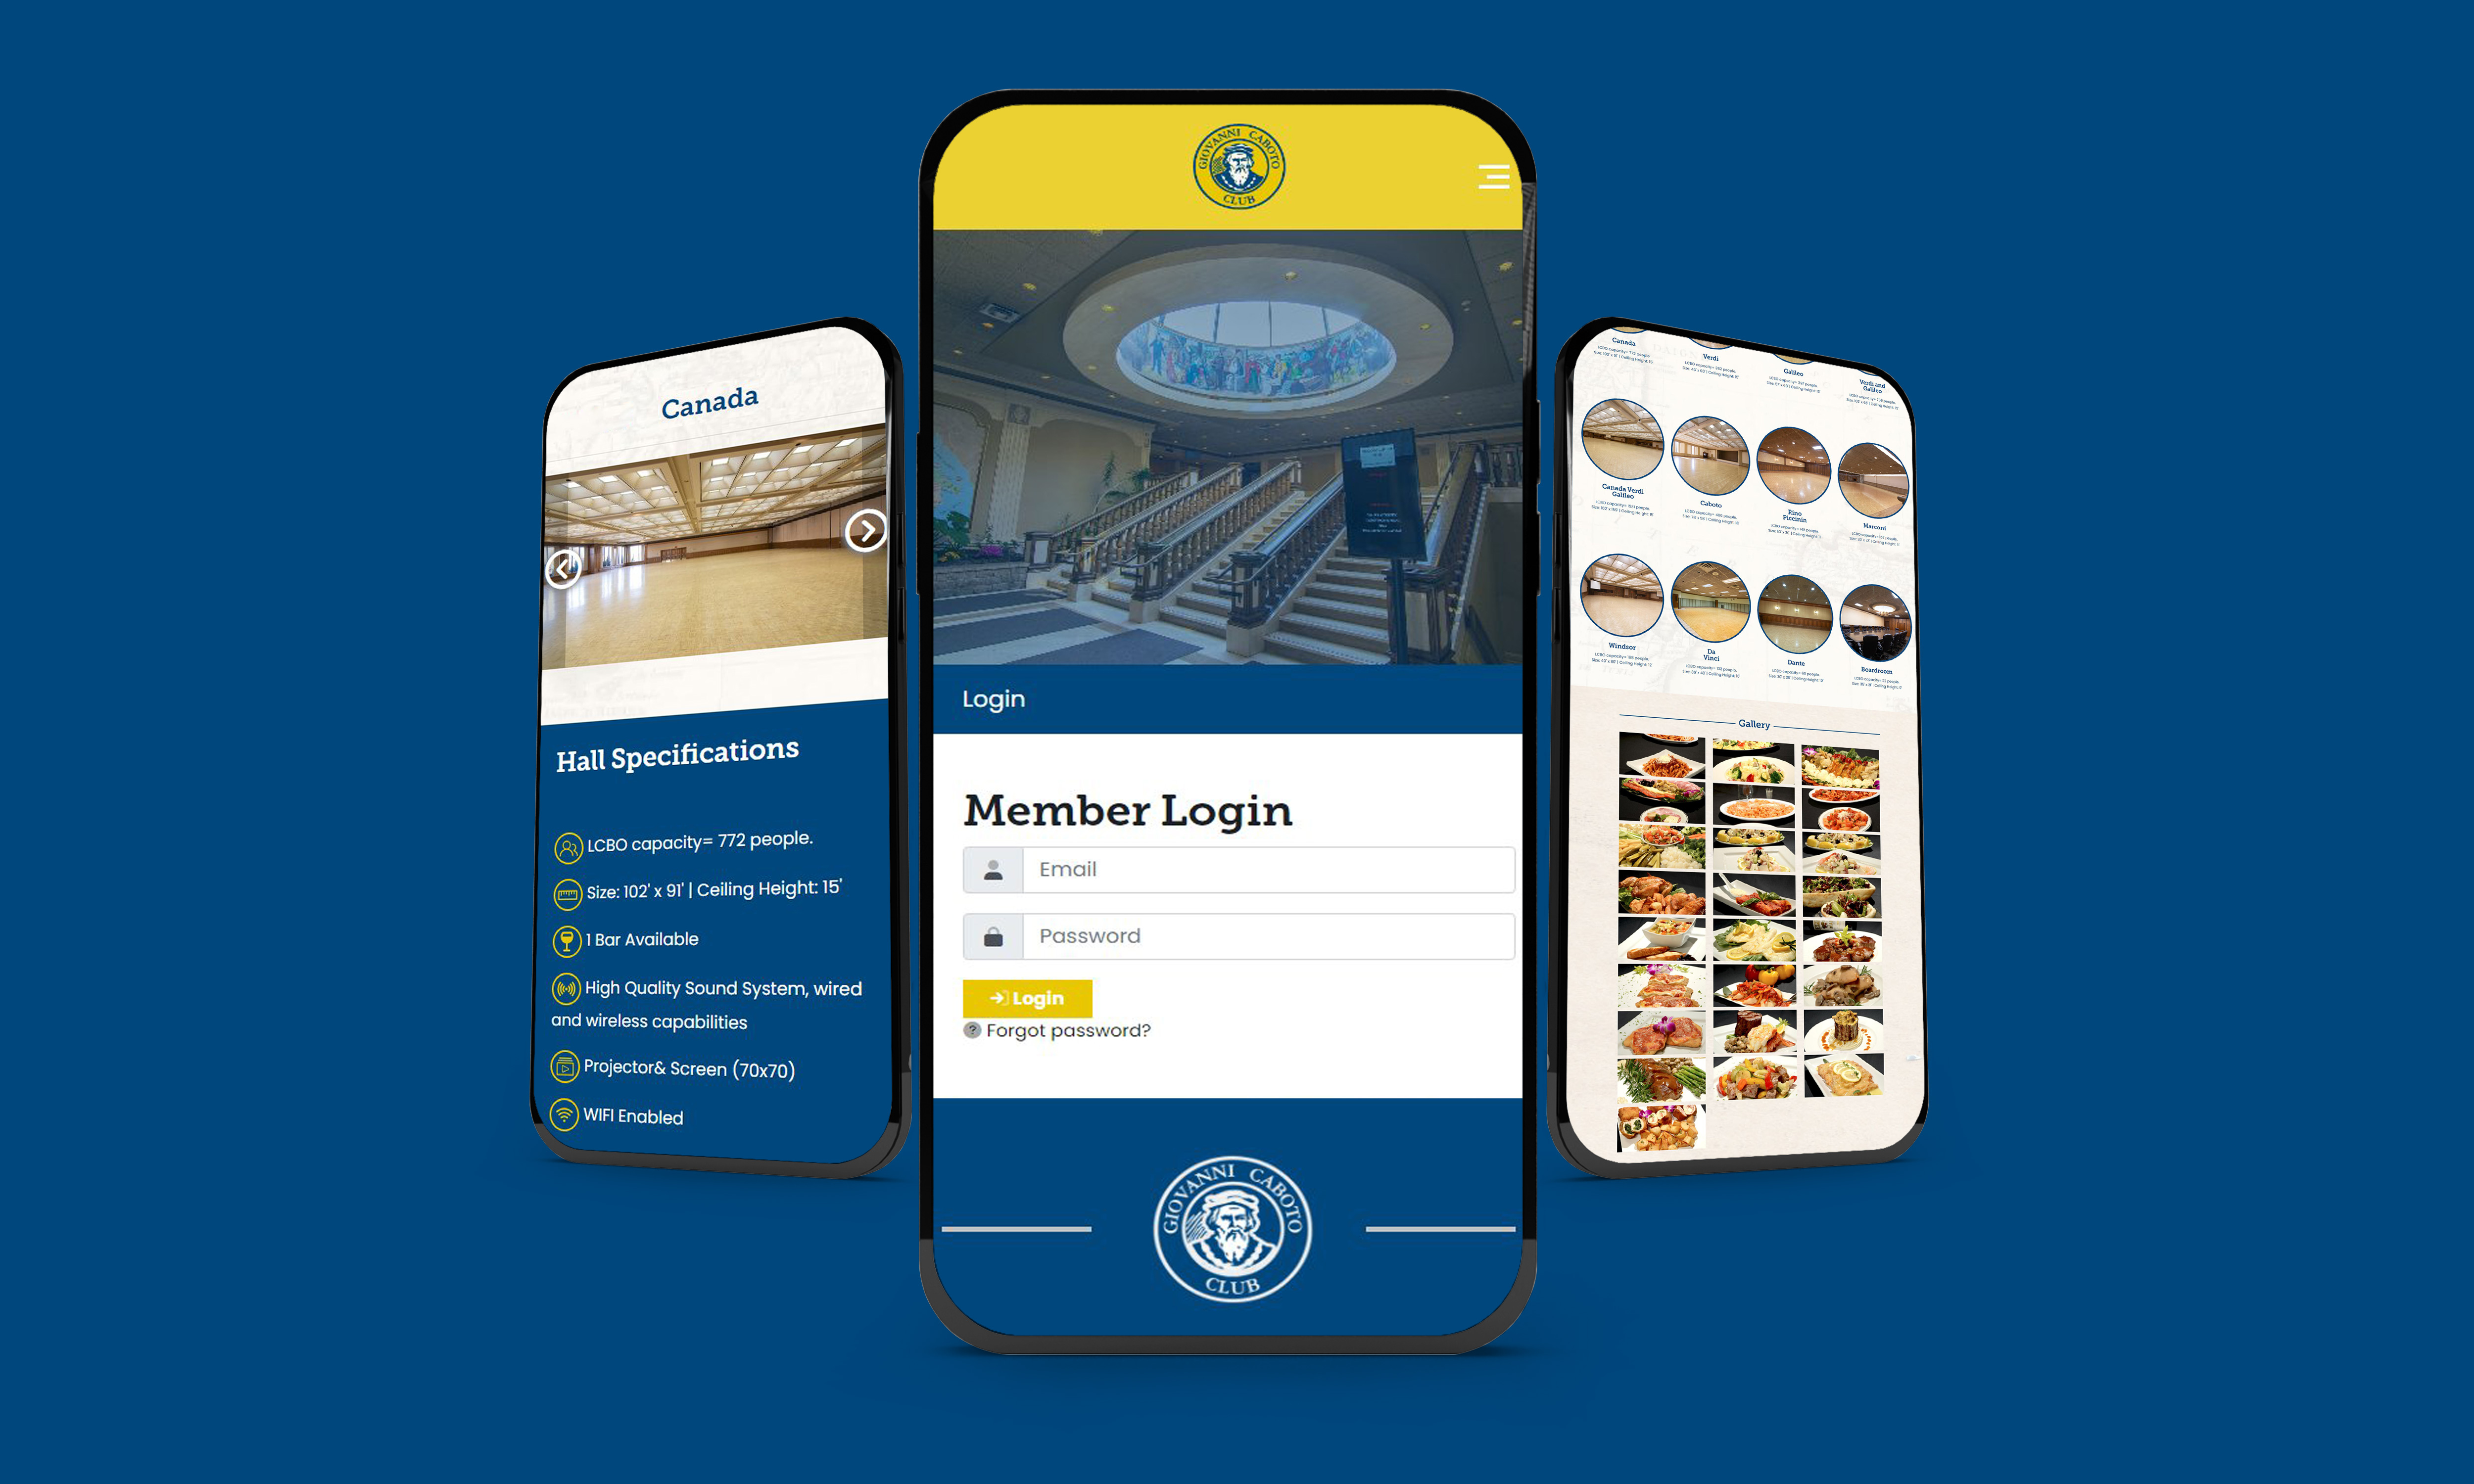 Caboto Club website - Member login system and other pages on mobile